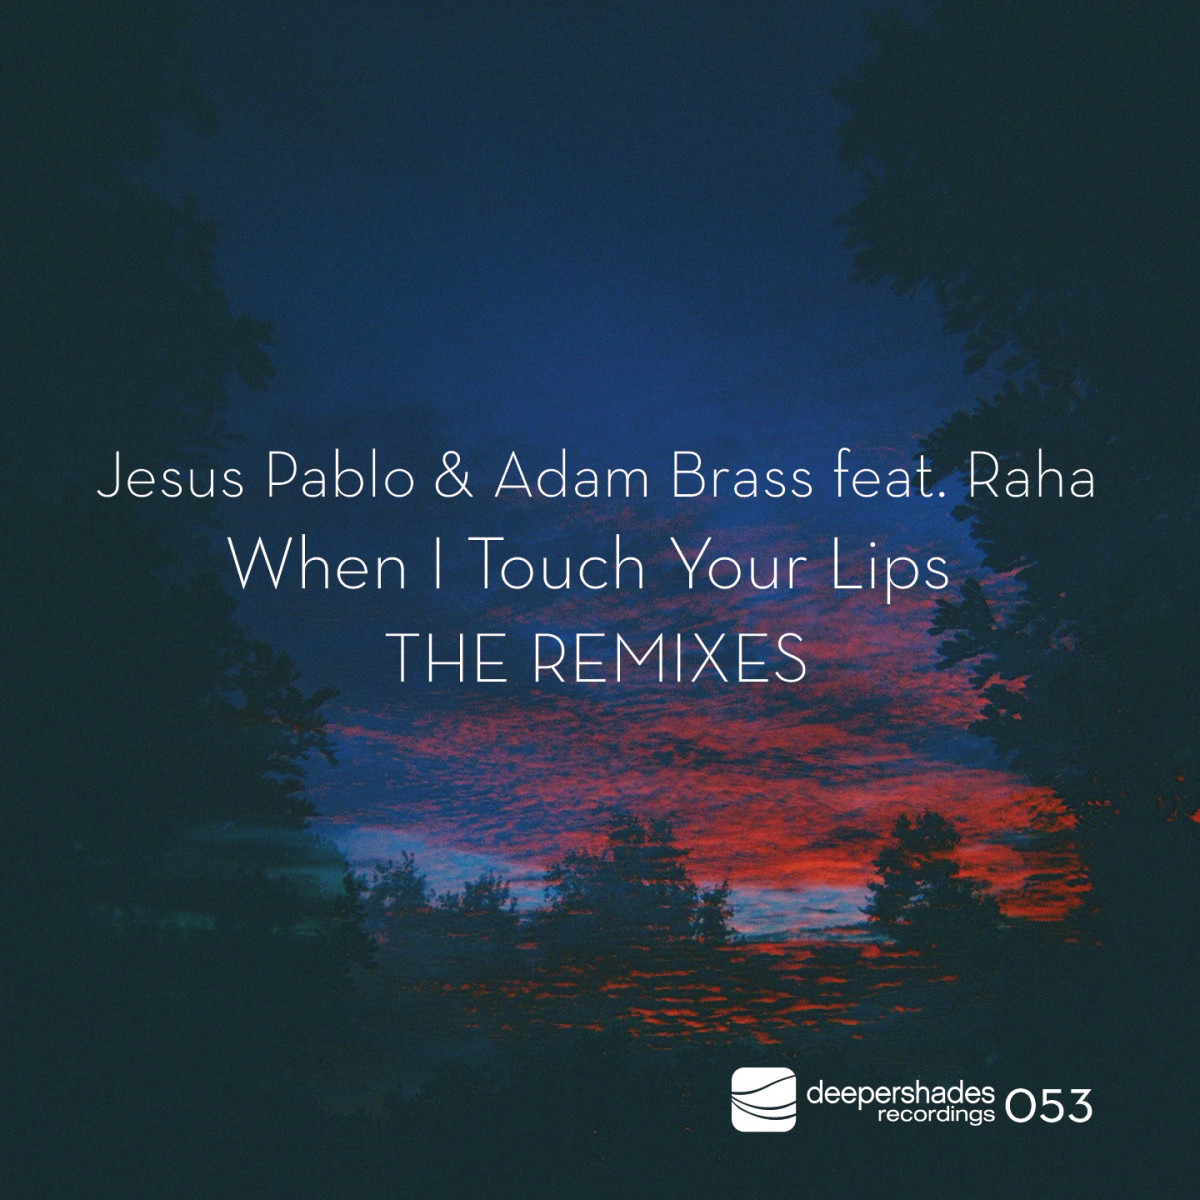 #nowplaying on radio.deepershades.net : Jesus Pablo & Adam Brass ft. Raha - When I Touch Your Lips (Dub Mix) #deephouse #livestream #dsoh #housemusic